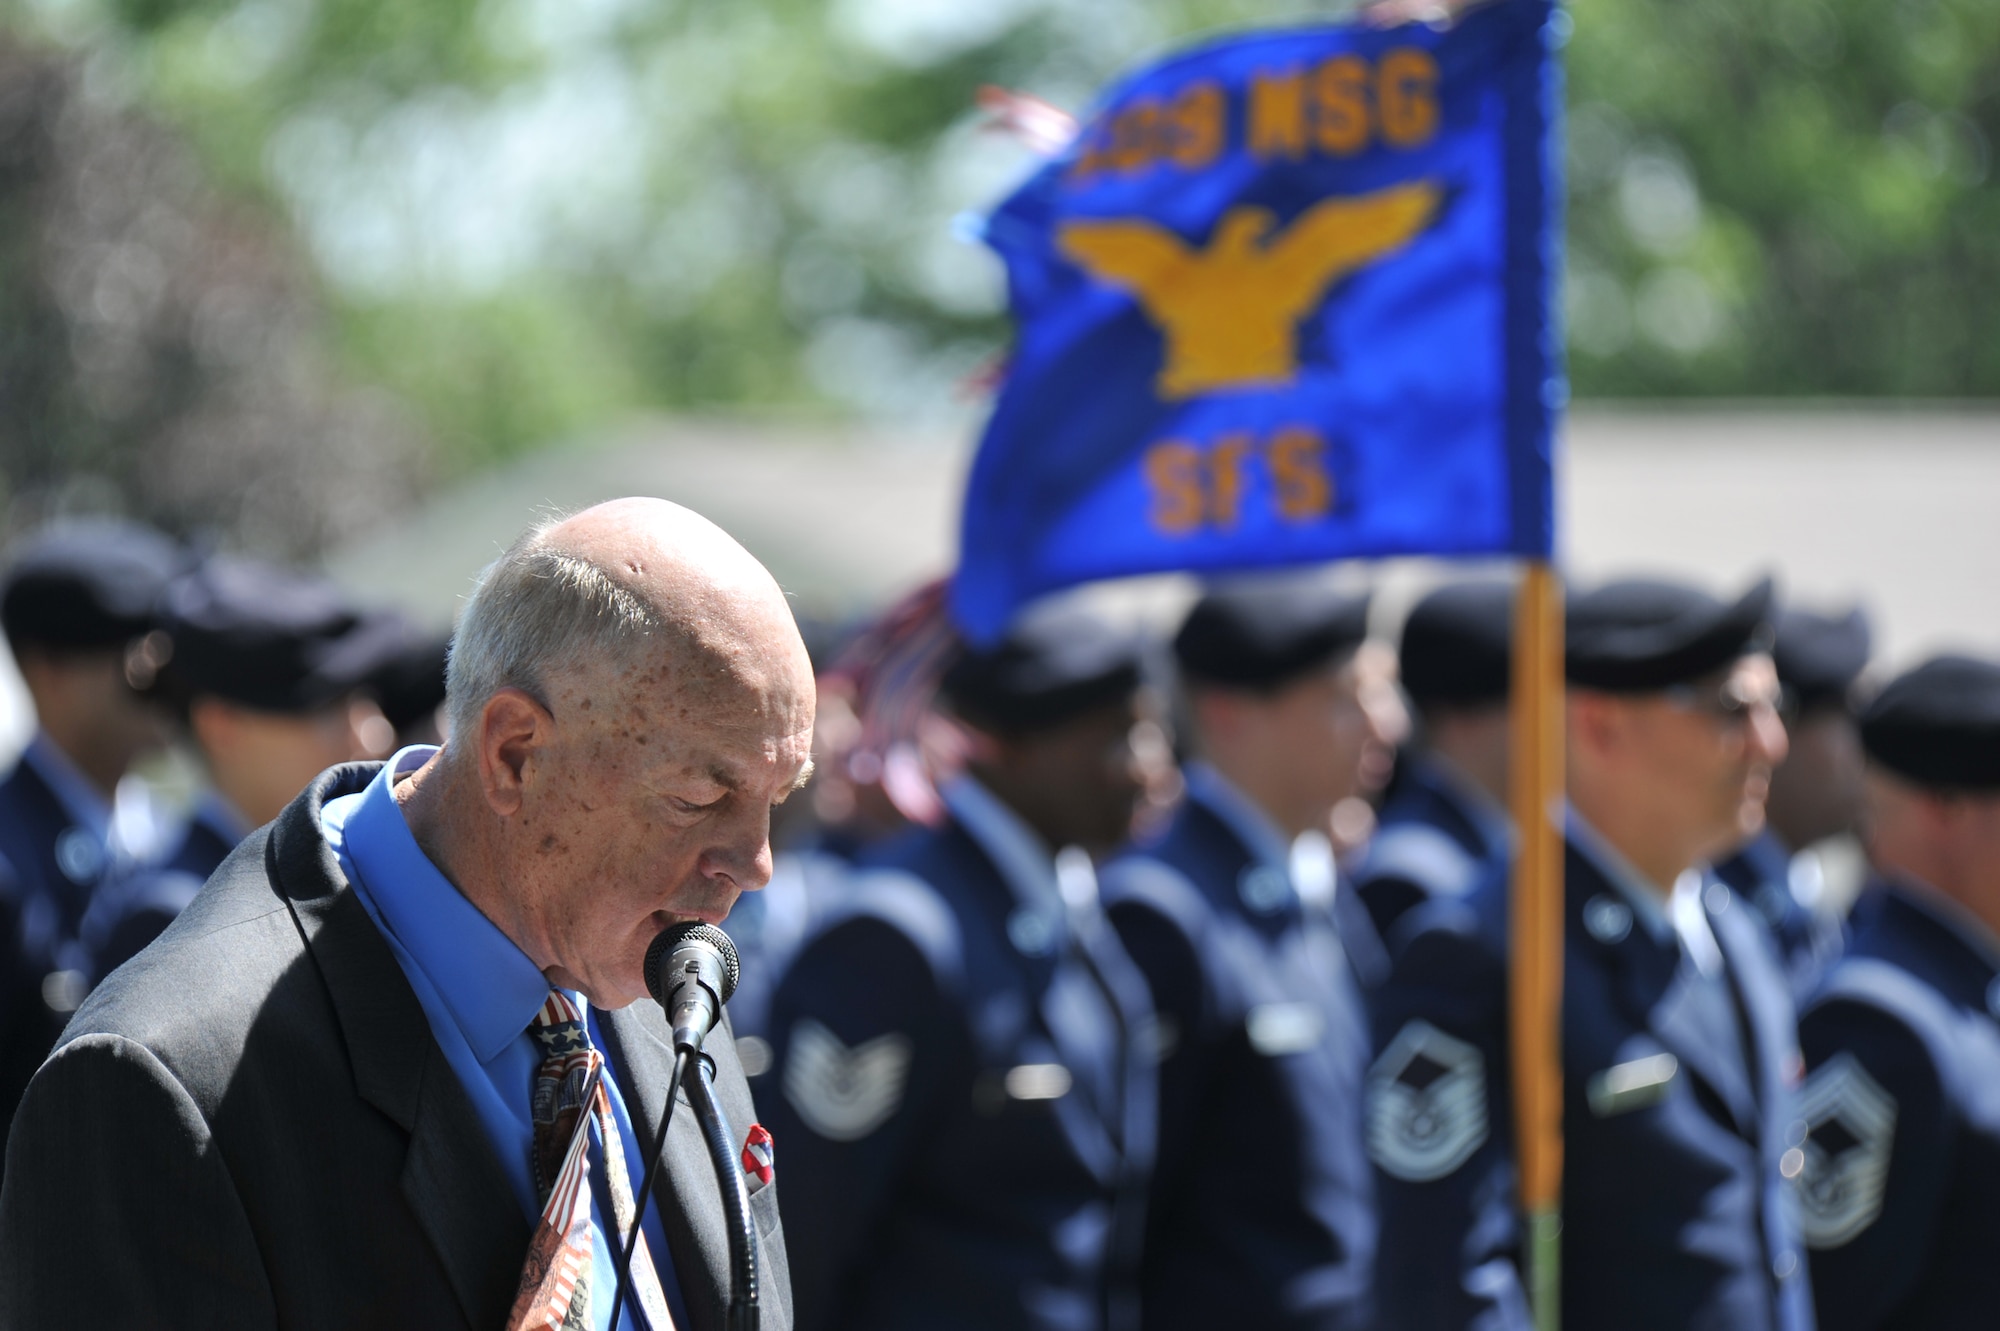 Dave Rouchka, wreath-laying ceremony event coordinator, talks about 2nd Lt. George Whiteman’s legacy during a ceremony May 18, 2013, in Sedalia, Mo., as members of the 509th Security Forces Squadron stands at attention in the background. The 509th SFS and Sedalia are “sister cities” and support each other in community events like this one. (U.S. Air Force photo by Senior Airman Brigitte N. Brantley/Released)